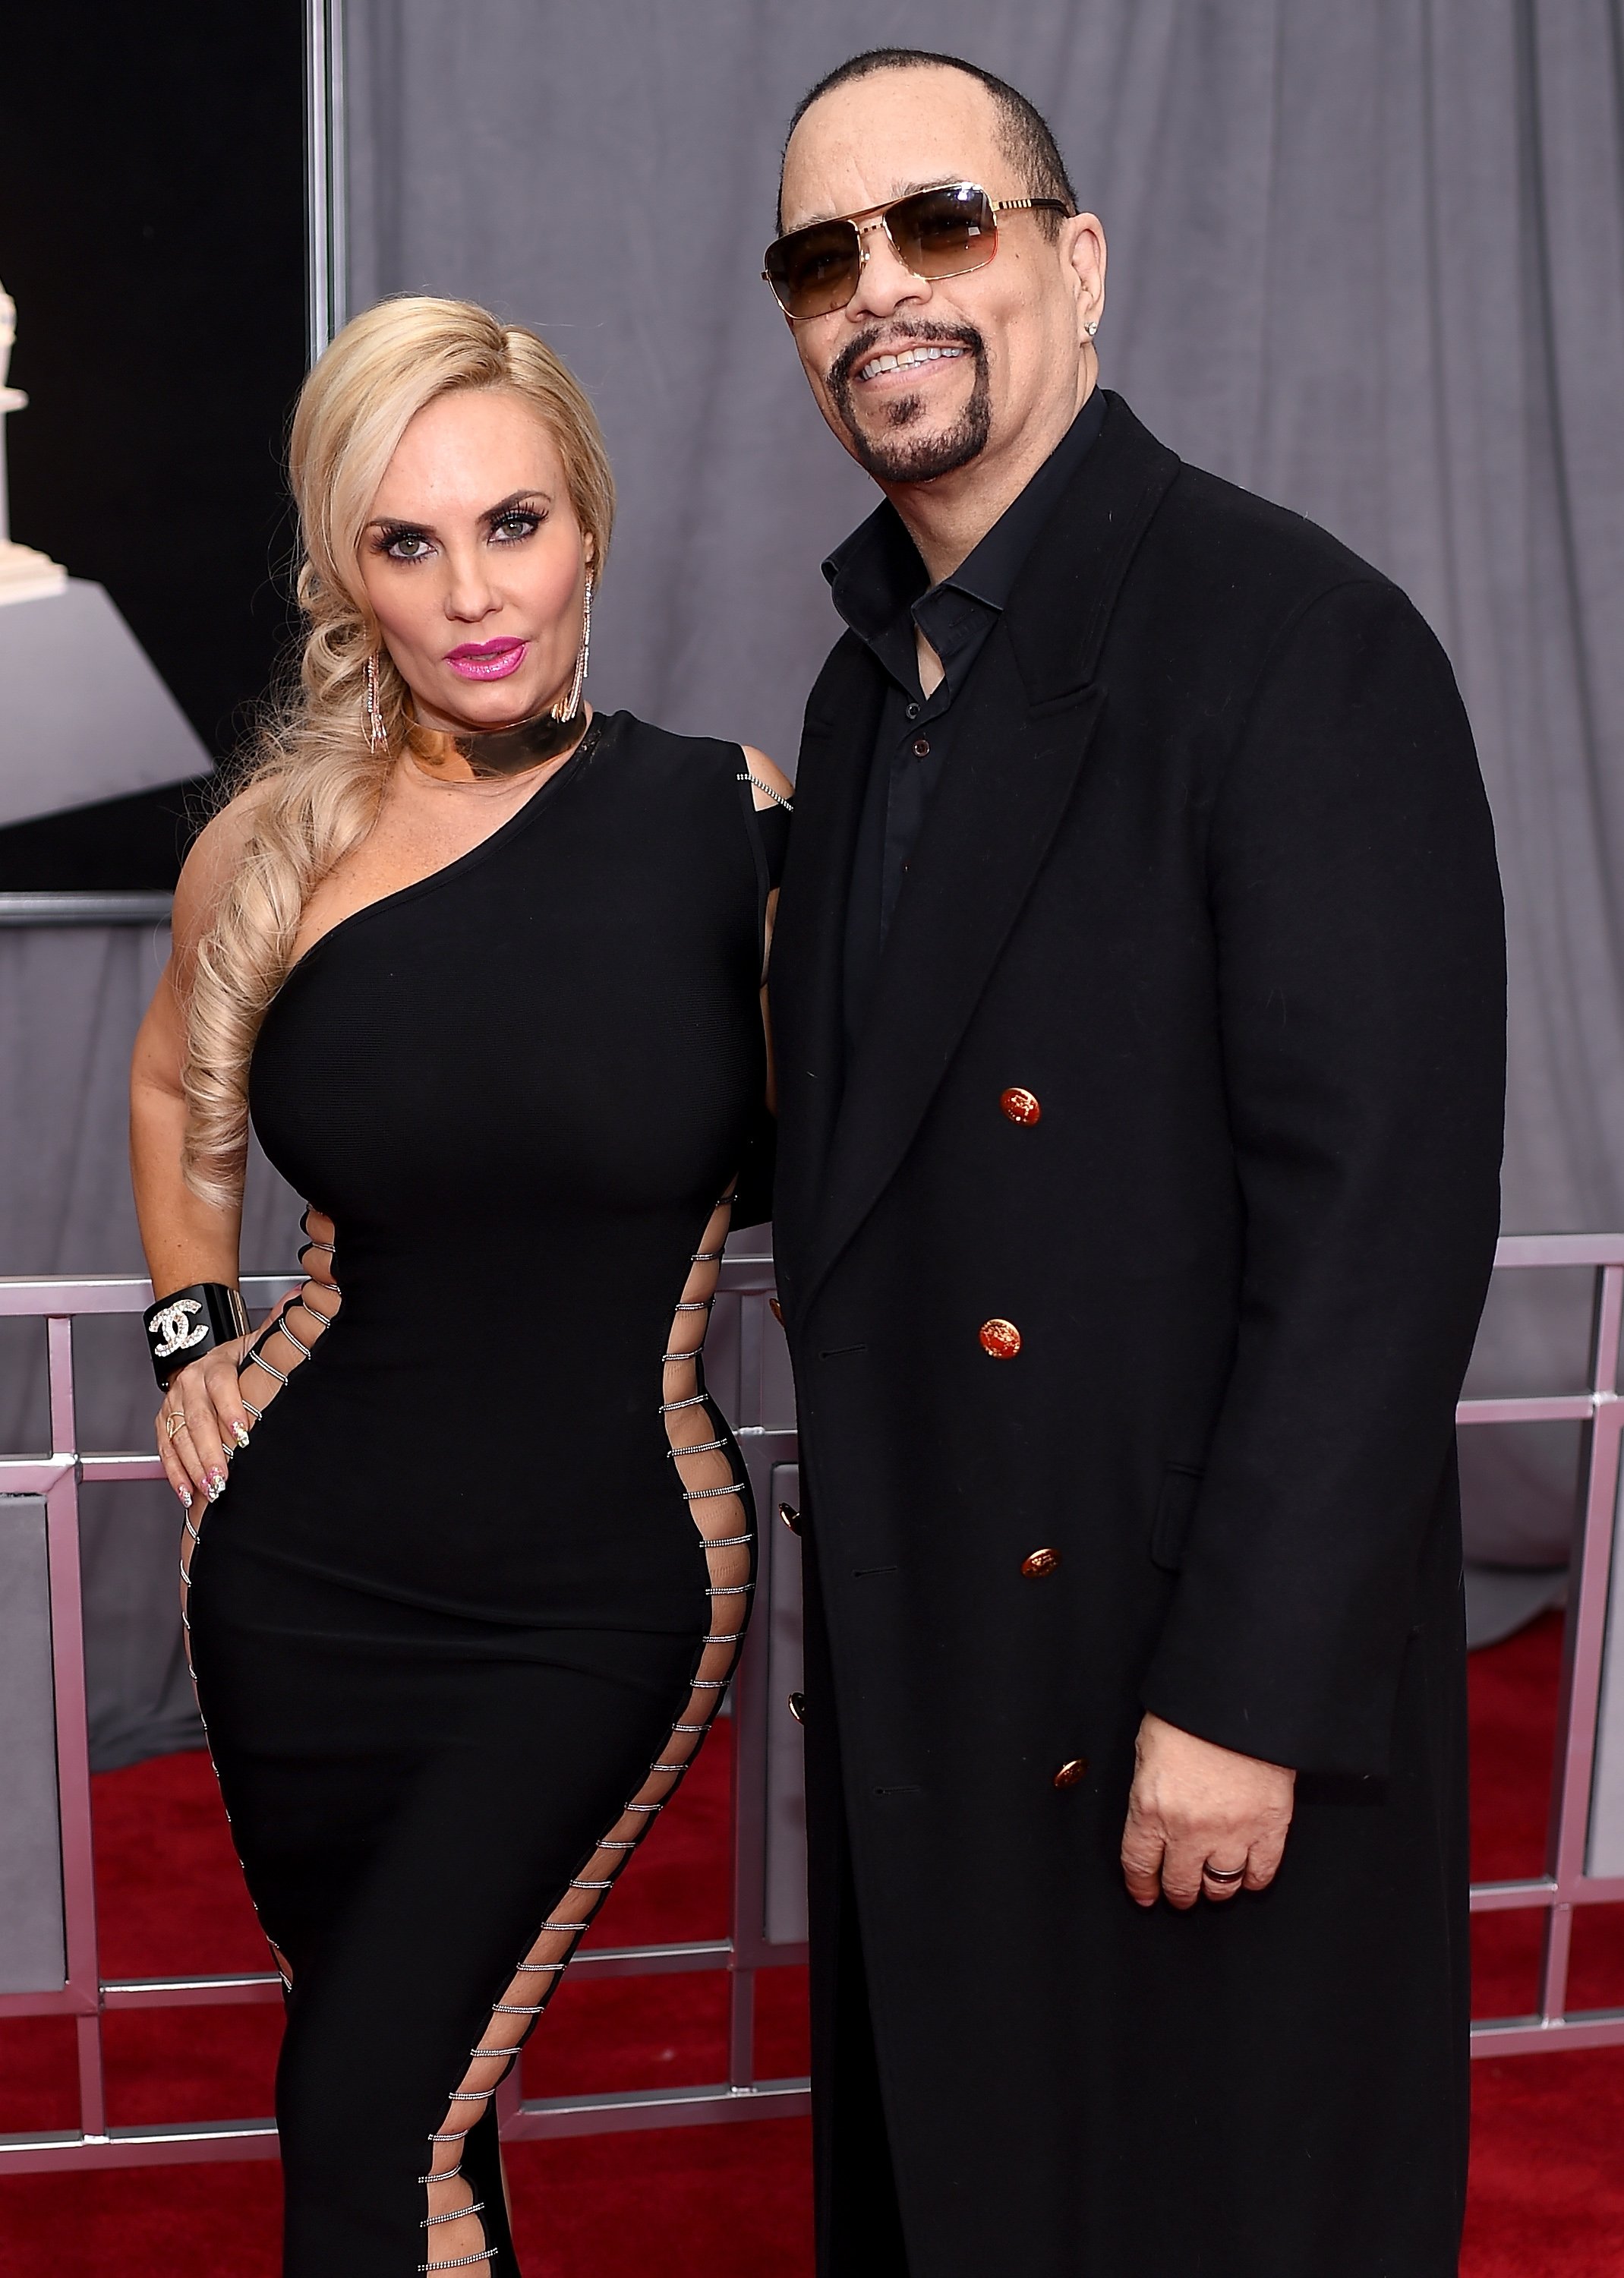 Coco Austin and Ice-T at the 60th Annual Grammy Awards at Madison Square Garden on January 28, 2018 in New York City | Photo: Getty Images